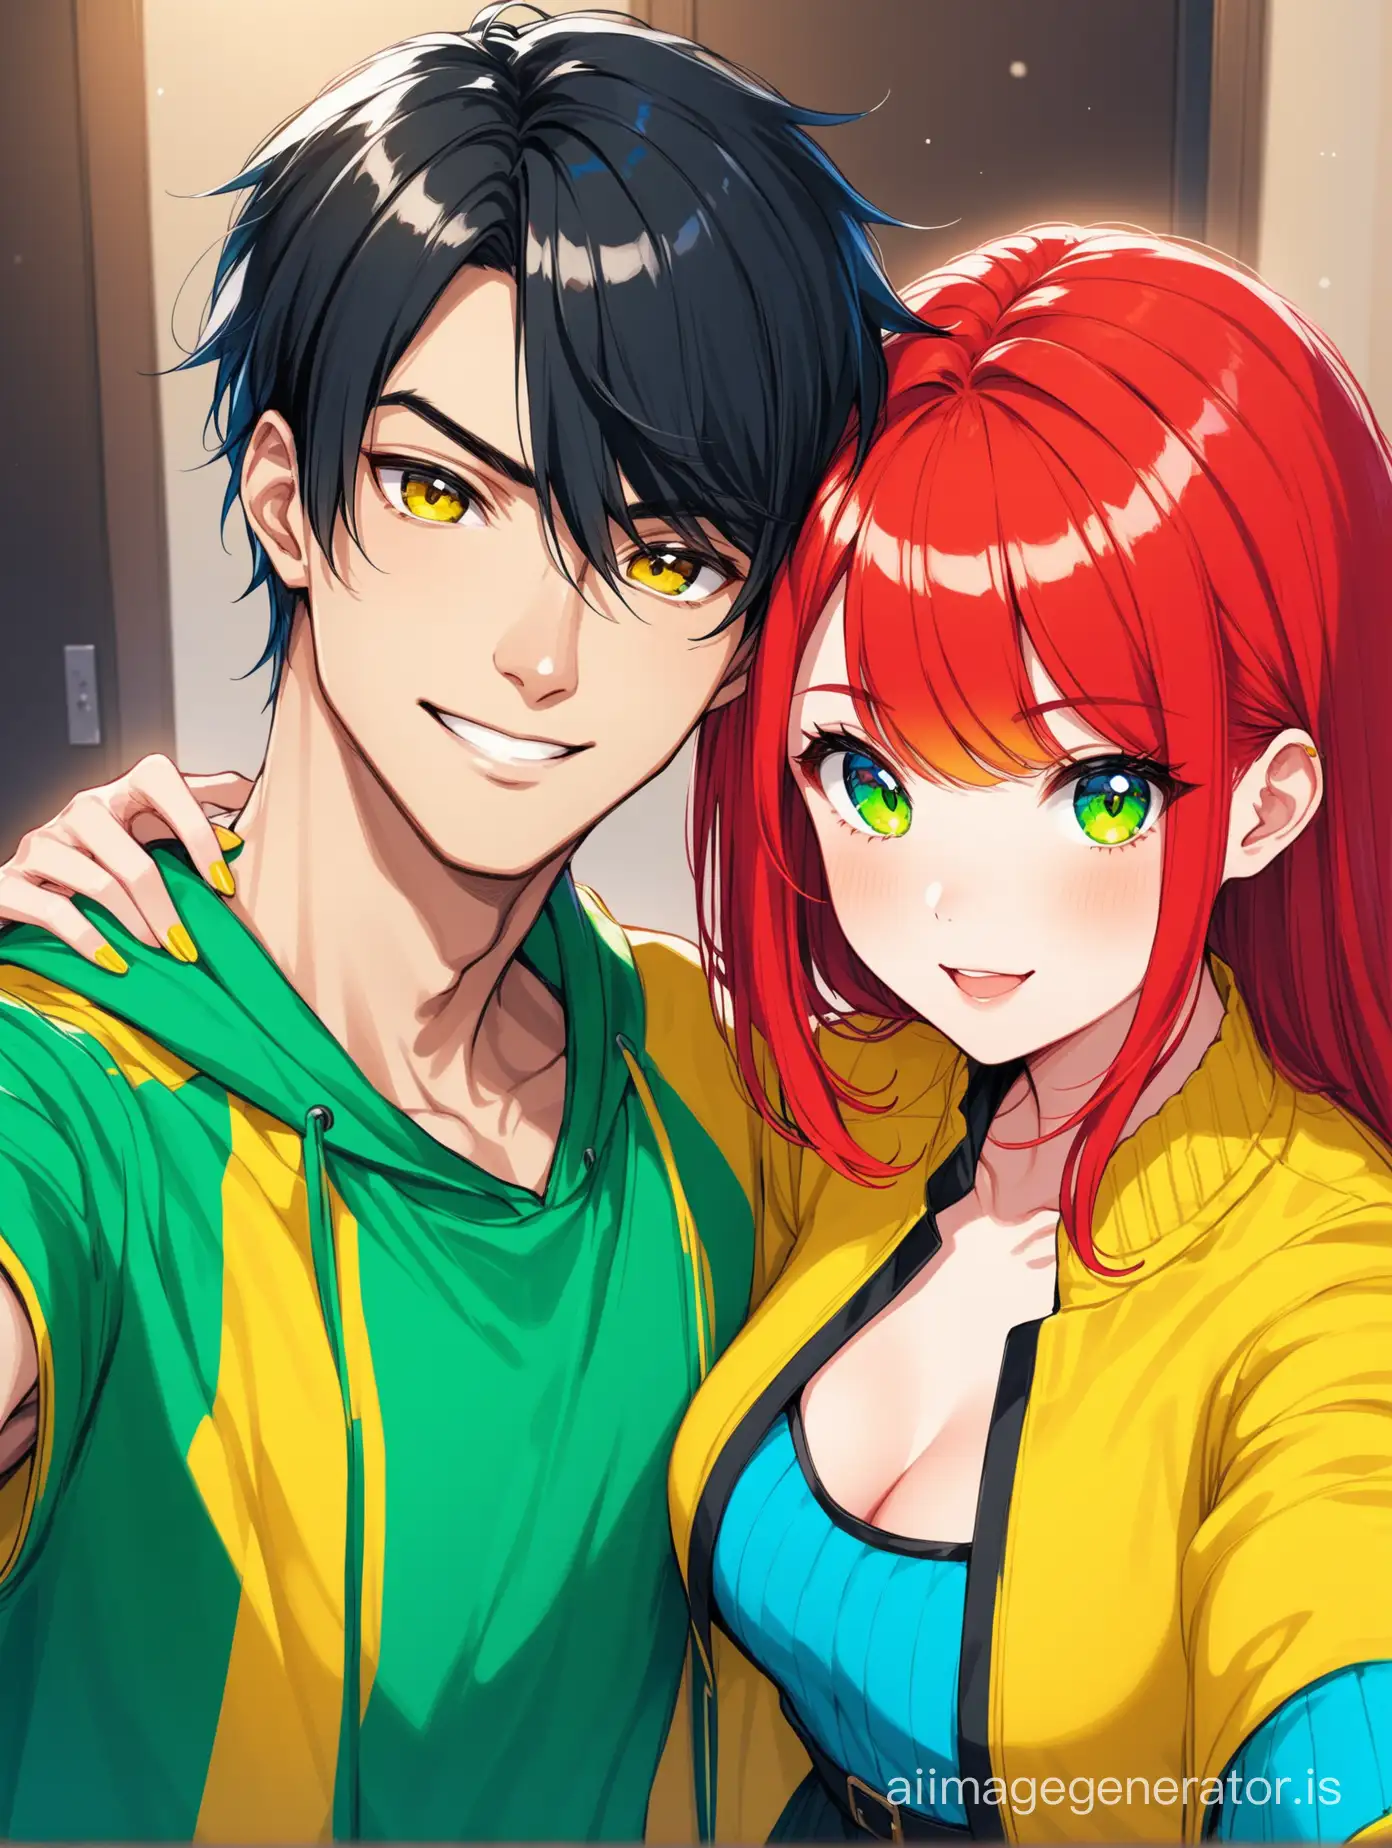 Vibrant-Couple-RedHaired-Selfie-Girl-and-Stylish-BlackHaired-Guy-in-Colorful-Attire